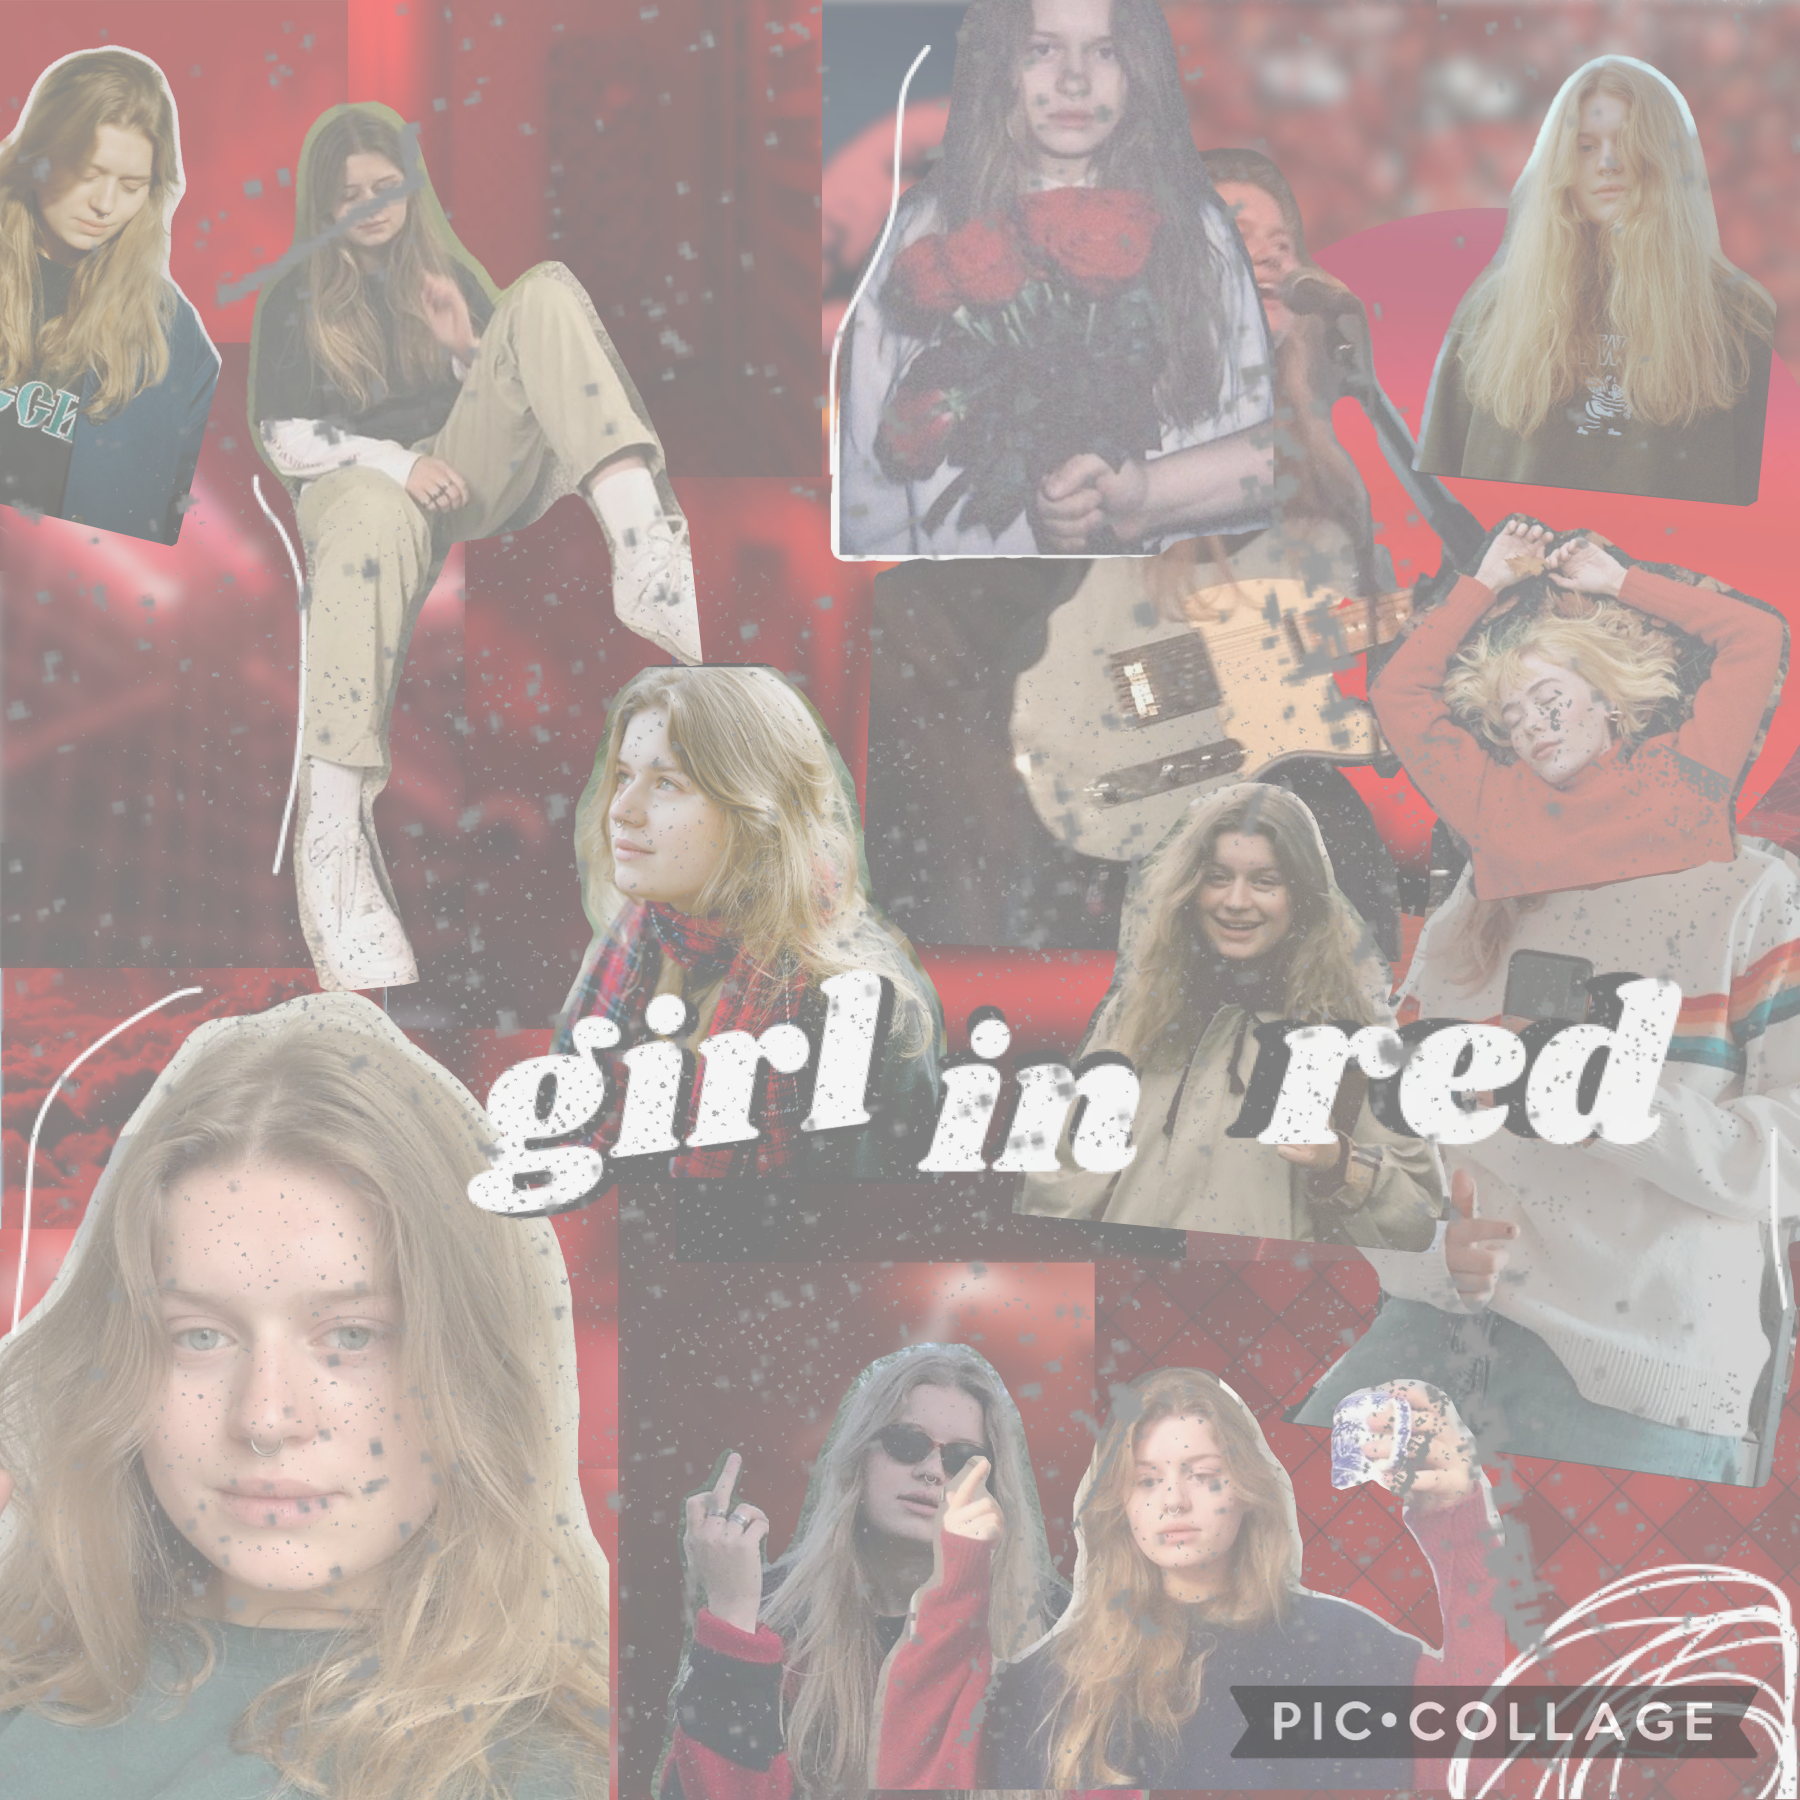 girl in red collage <33 requested by @ethereal  
hope everyone is having a good day/night 